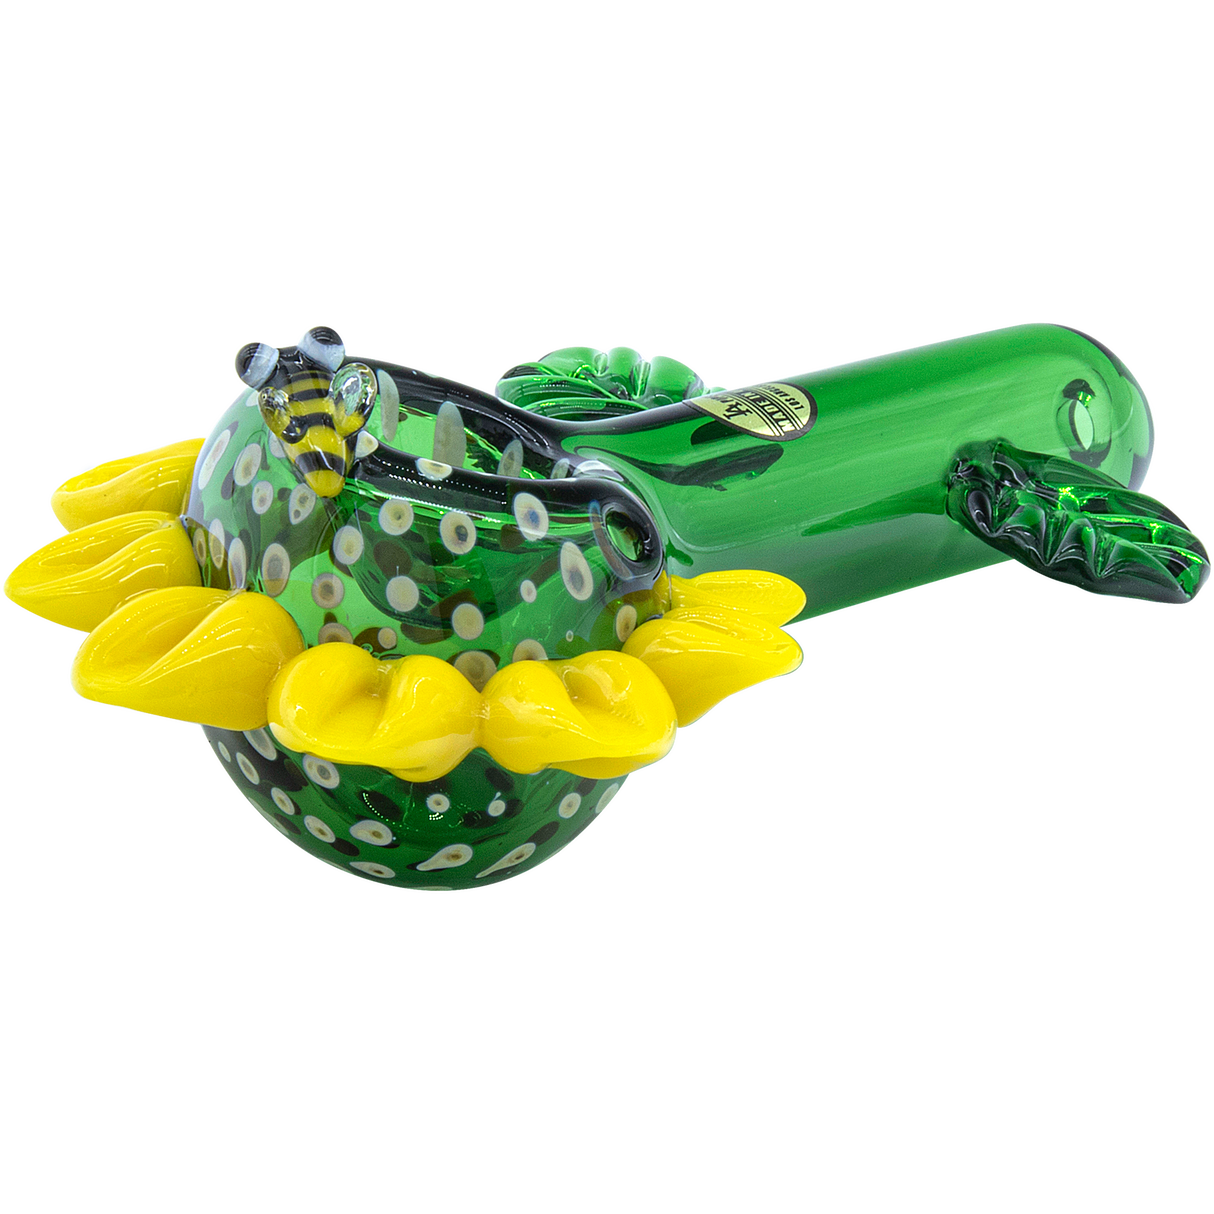 LA Pipes "Sunny Sunflowers" Glass Pipe, 4.65" Spoon Design, Side View on White